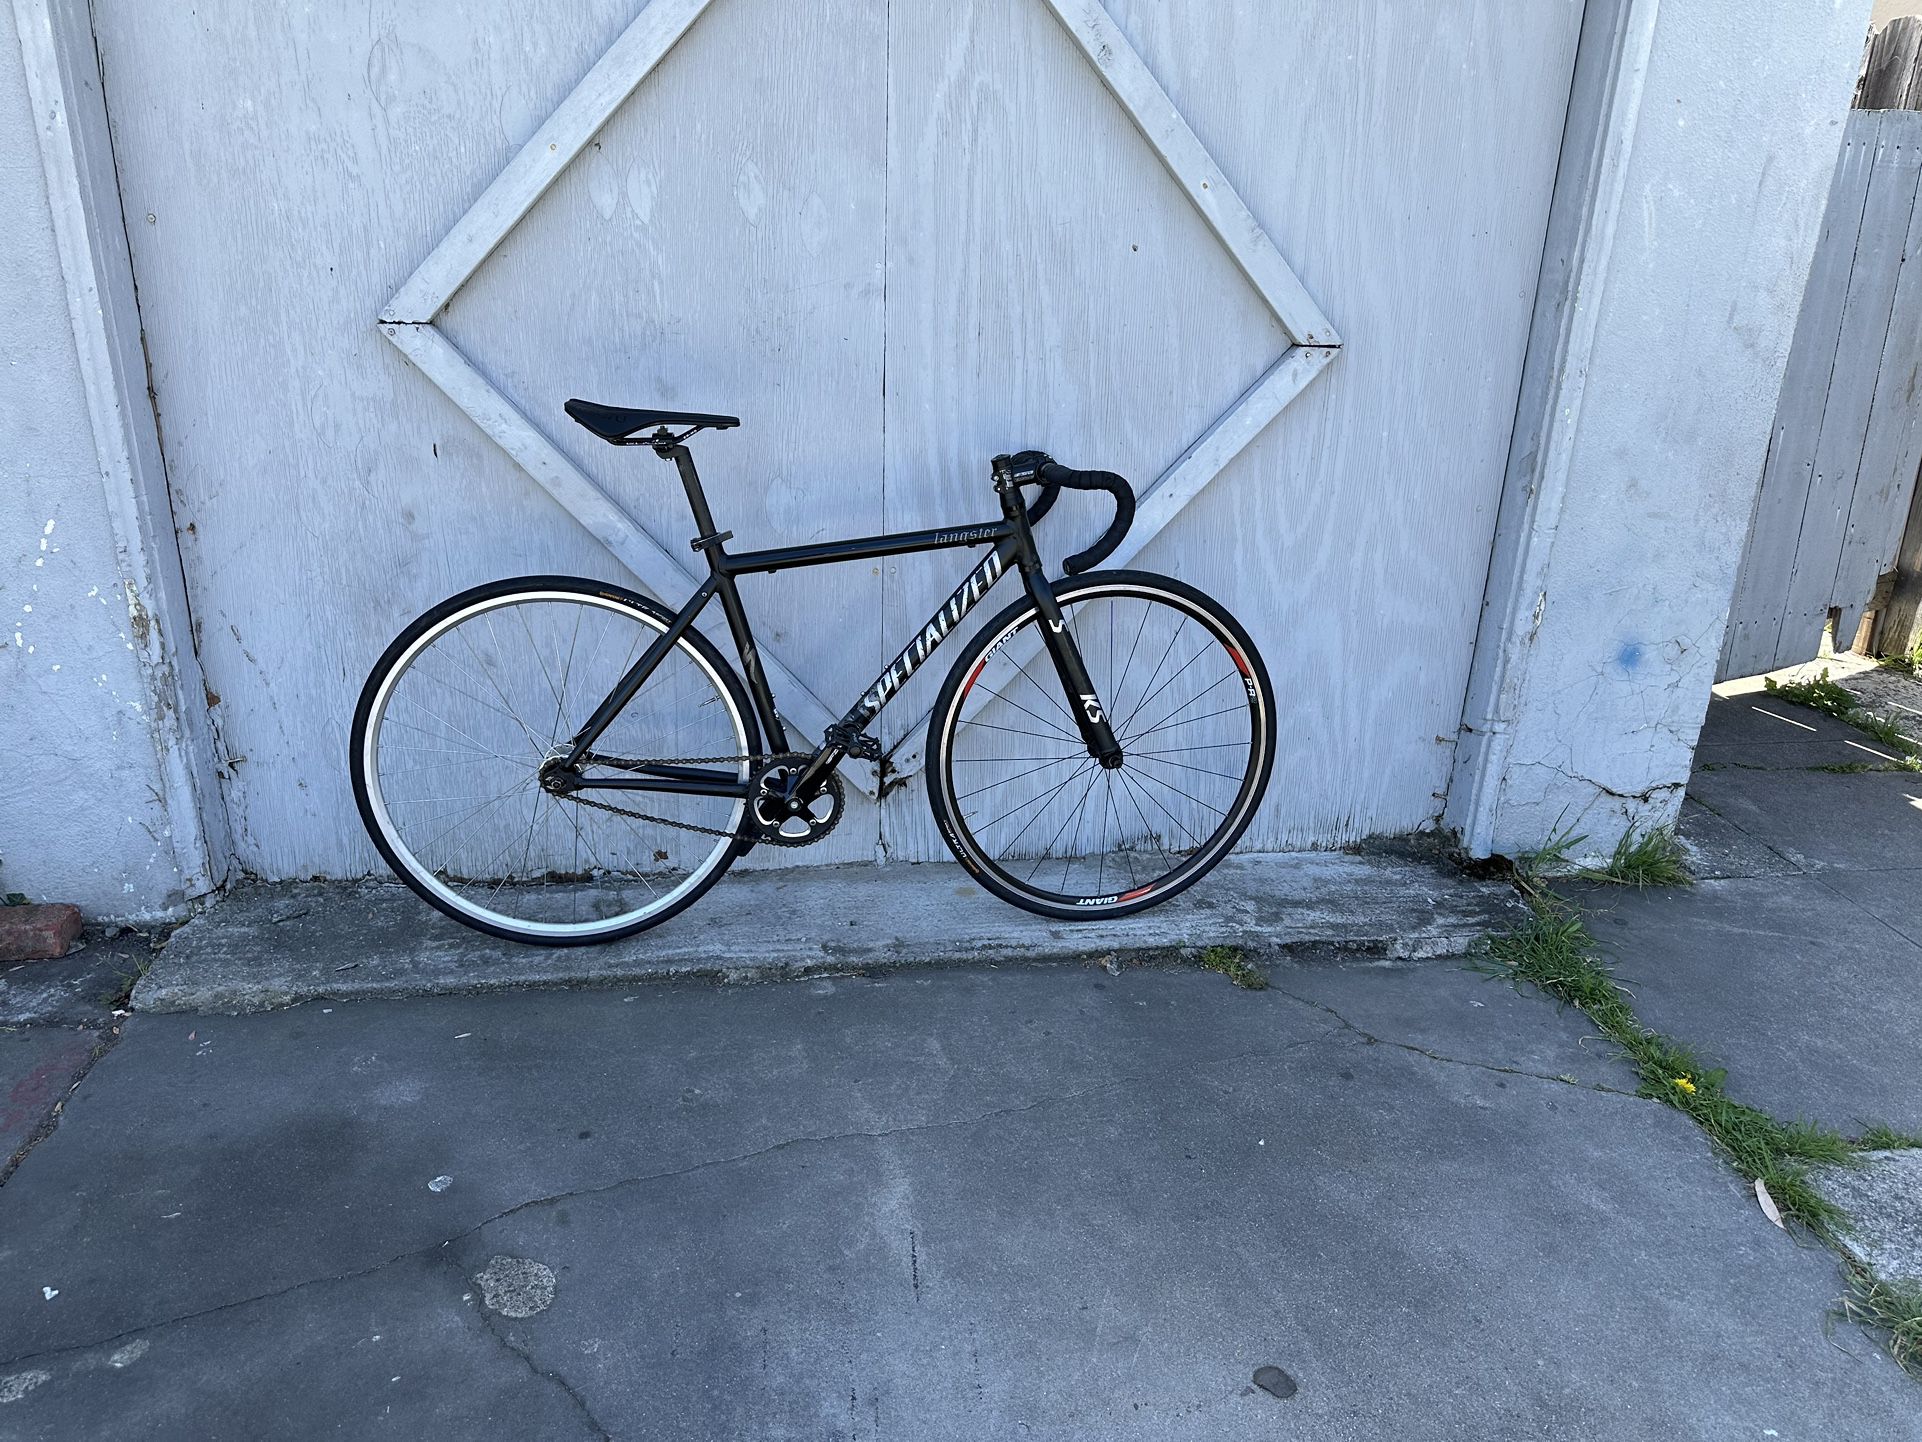 Specialized Langster 52cm